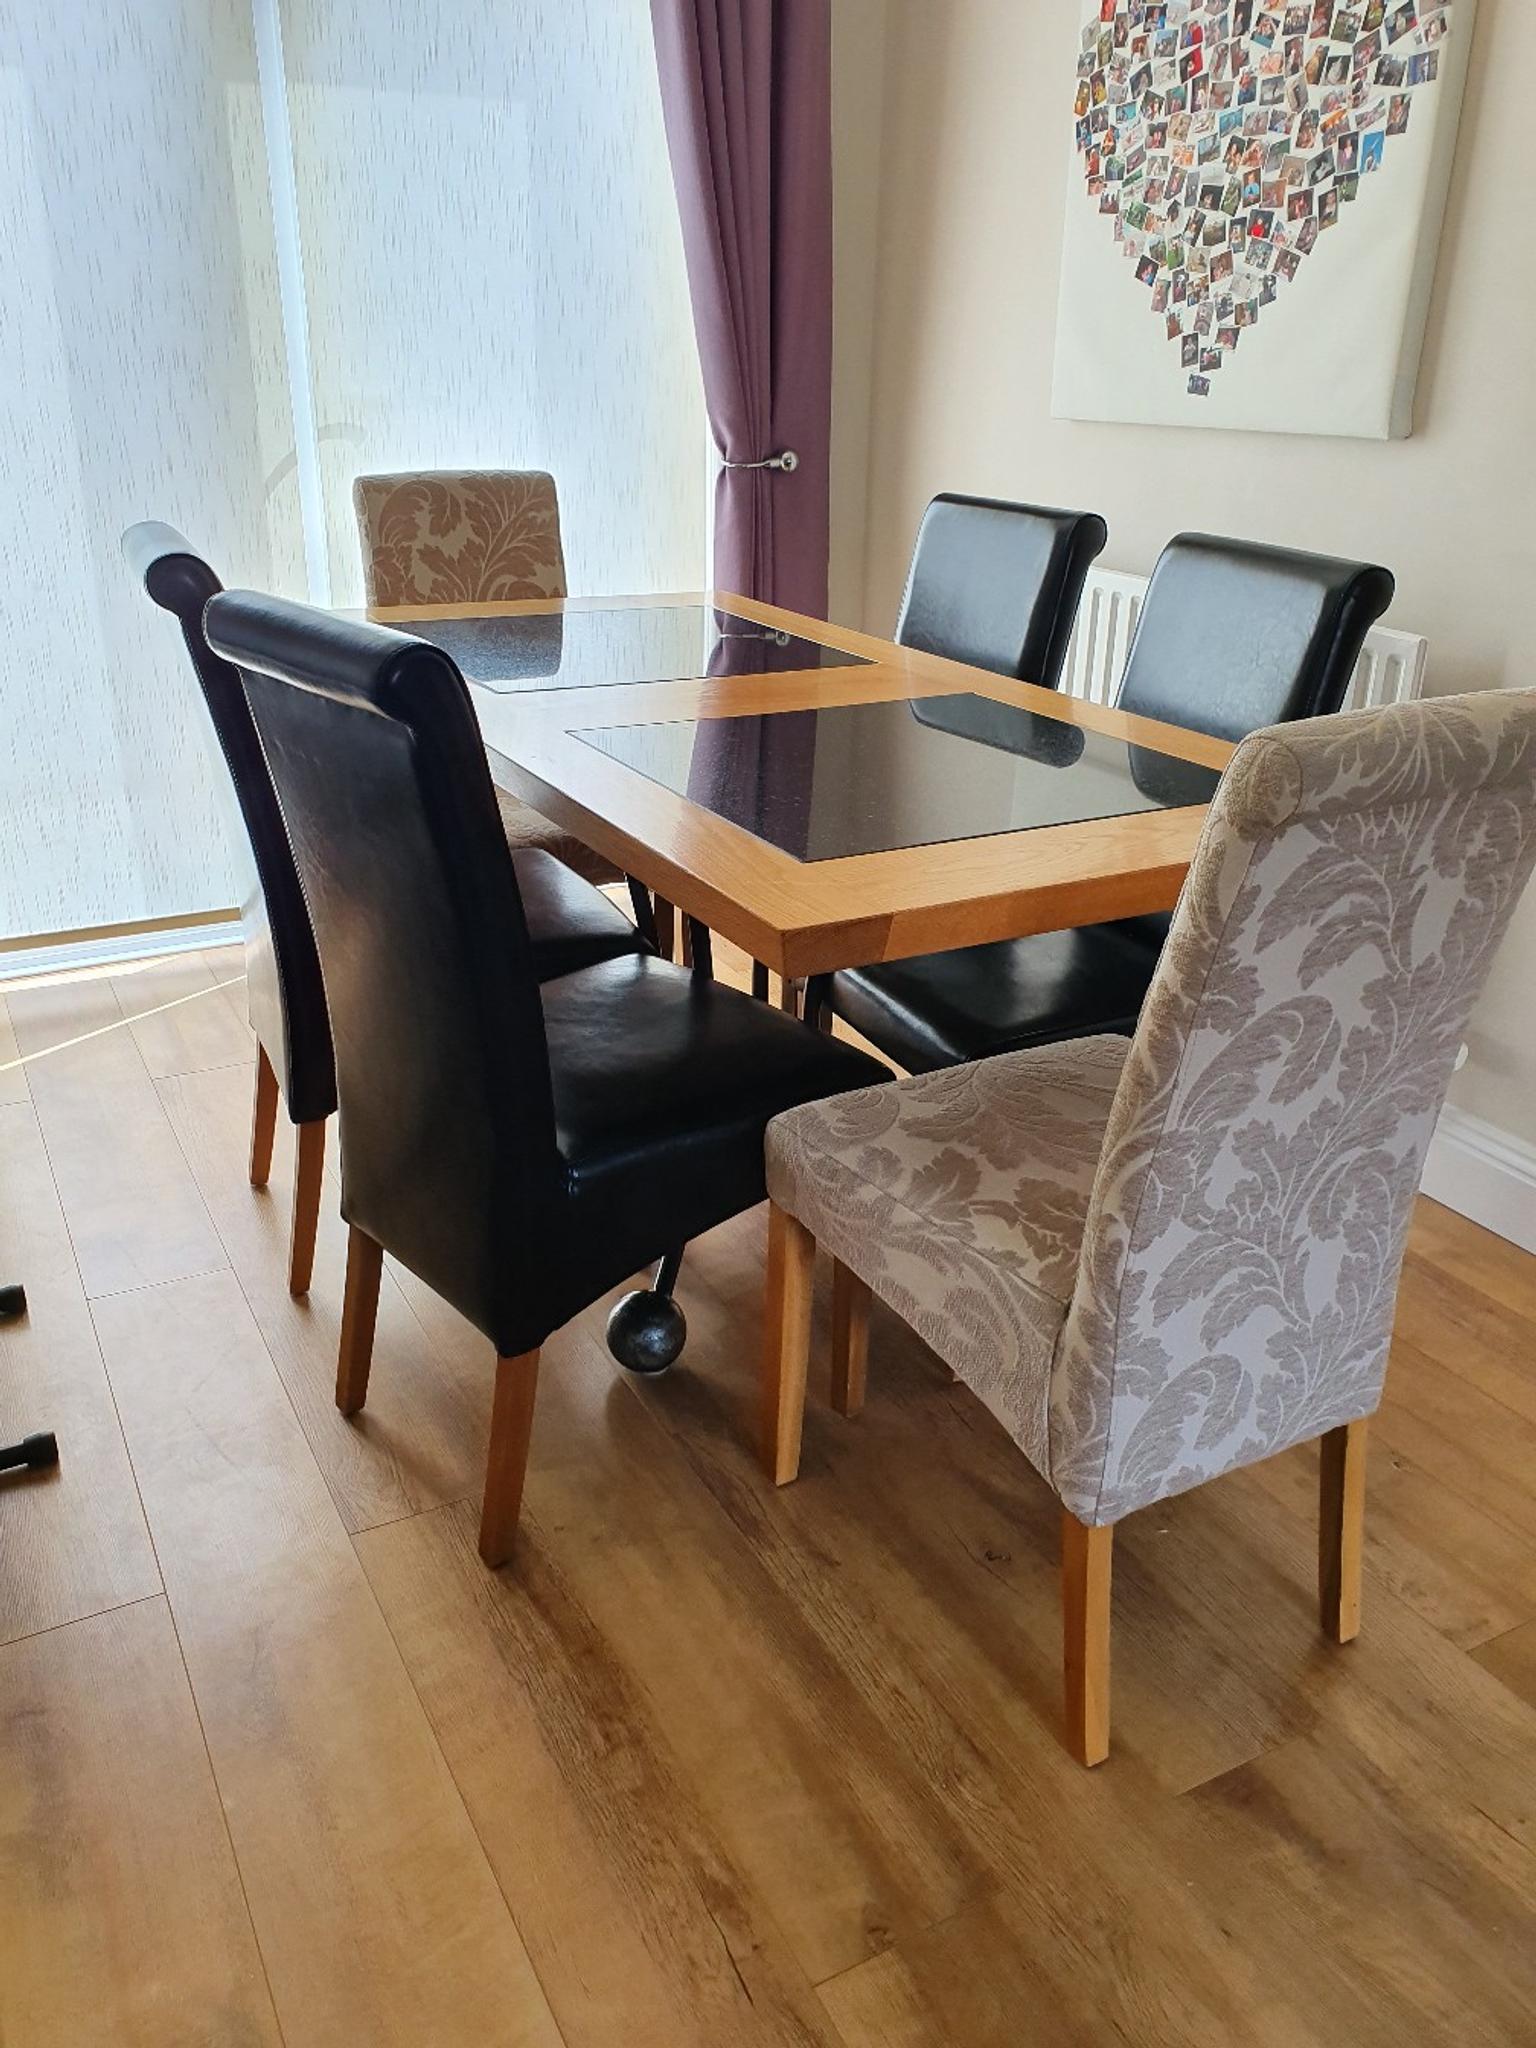 Oak And Granite Dining Table With 6 Chairs In Walsall Fur 200 00 Zum Verkauf Shpock At